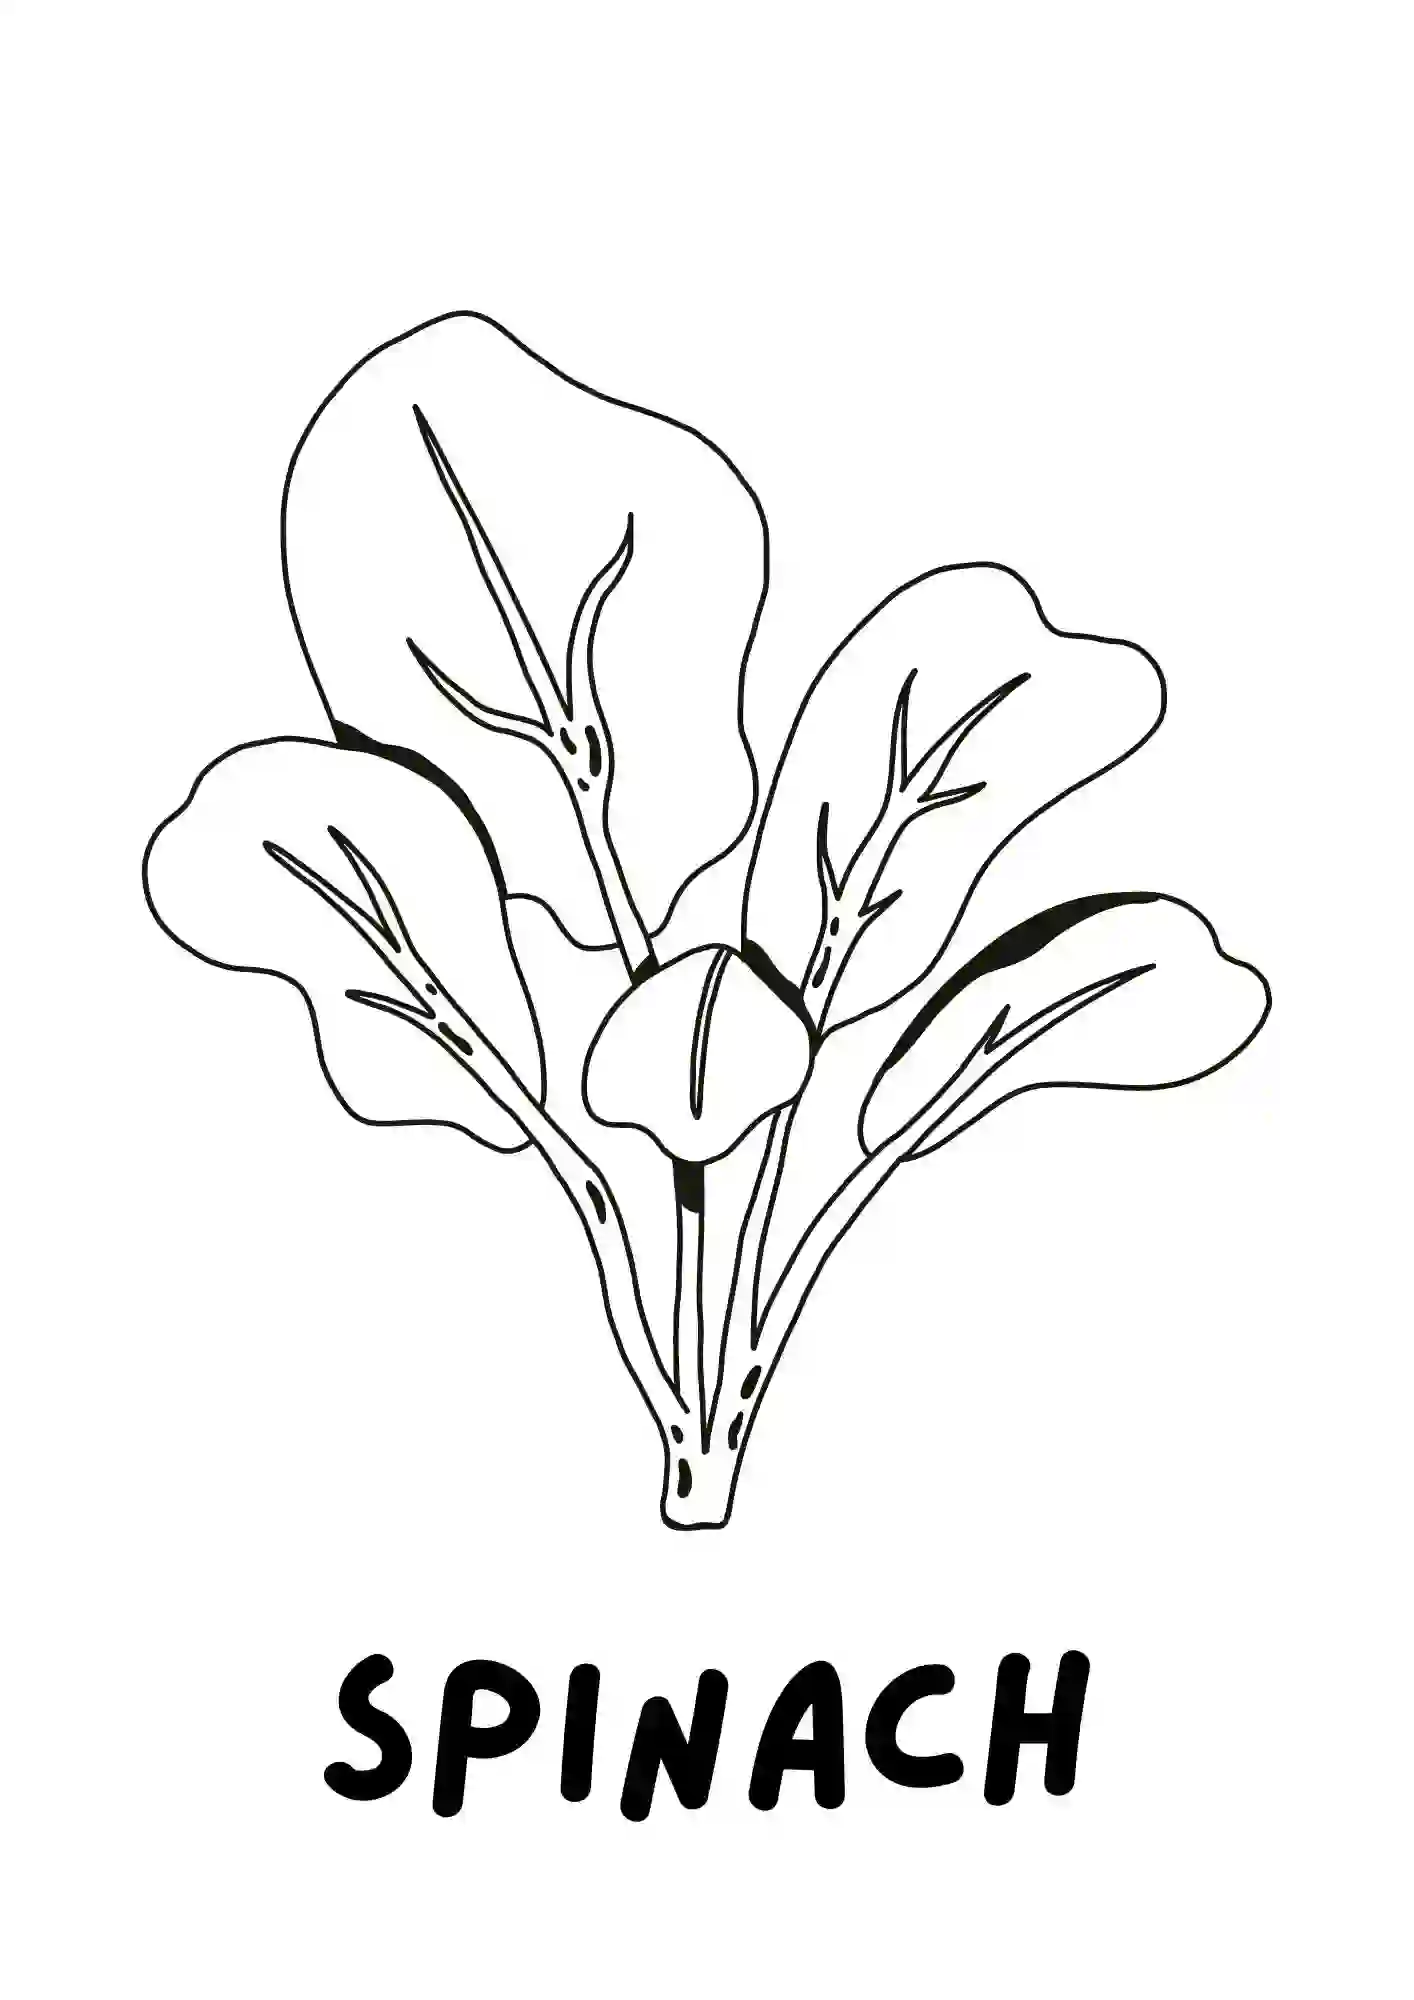 Vegetables Colouring Worksheets spinach